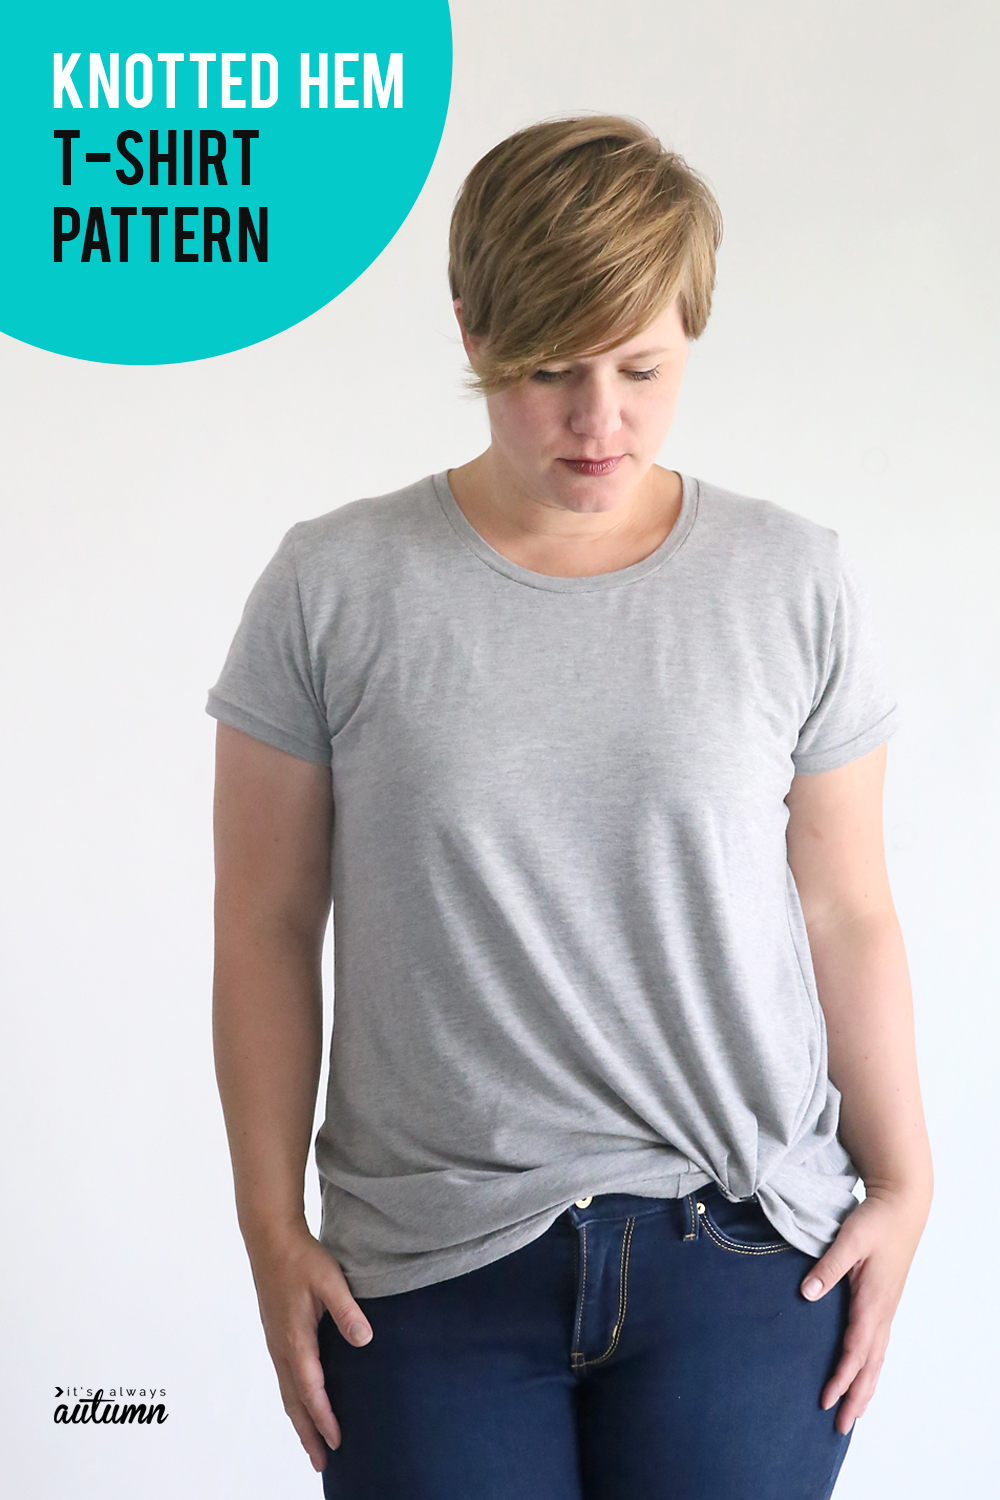 Click through to download the pattern for this cute knotted hem t-shirt pattern.